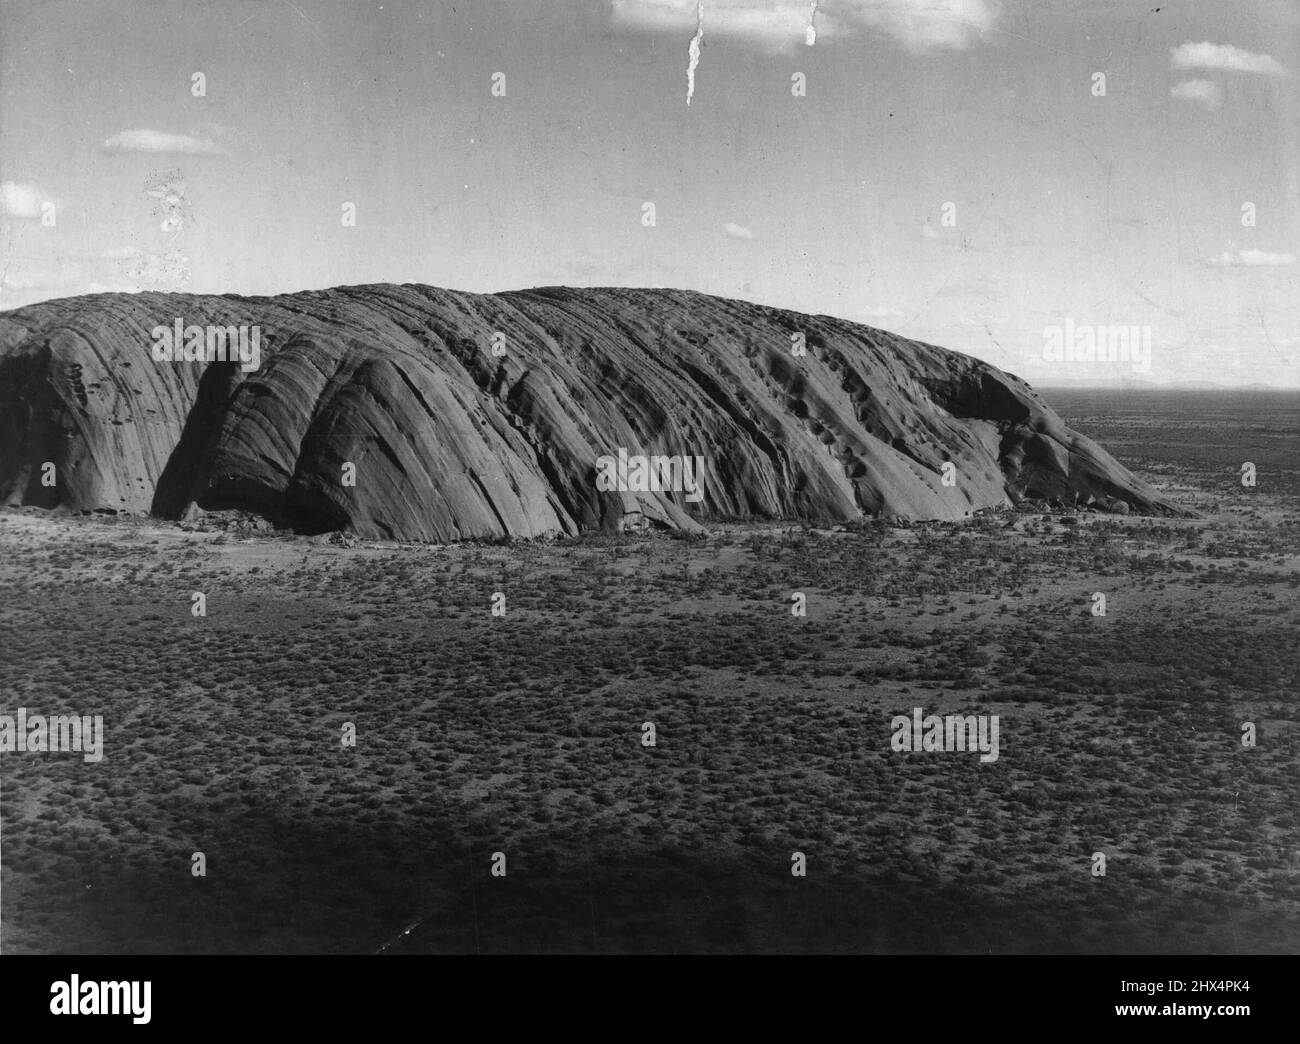 Its impact is impression ***** Ayers Rock from the air. The future of one of Australia's greatest tourist attractions - the mighty monolith of Ayers Rock - is now secure following the discovery of big reserves of underground water in the area. November 25, 1955. (Photo by The Telegraph Newspapers Co. Ltd.). Stock Photo